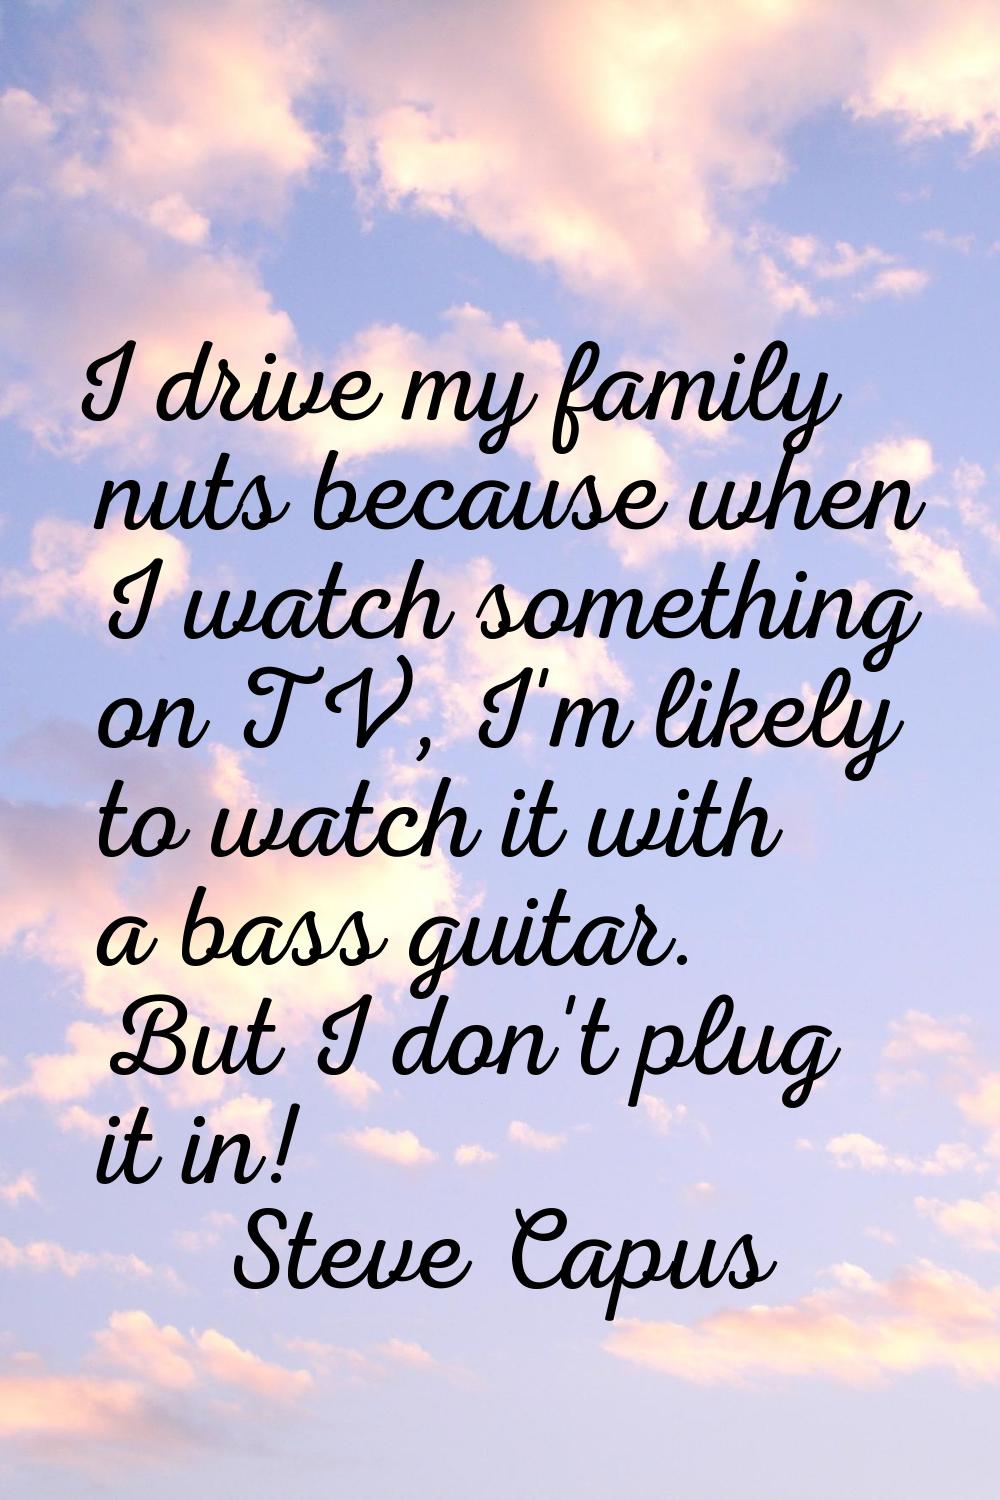 I drive my family nuts because when I watch something on TV, I'm likely to watch it with a bass gui